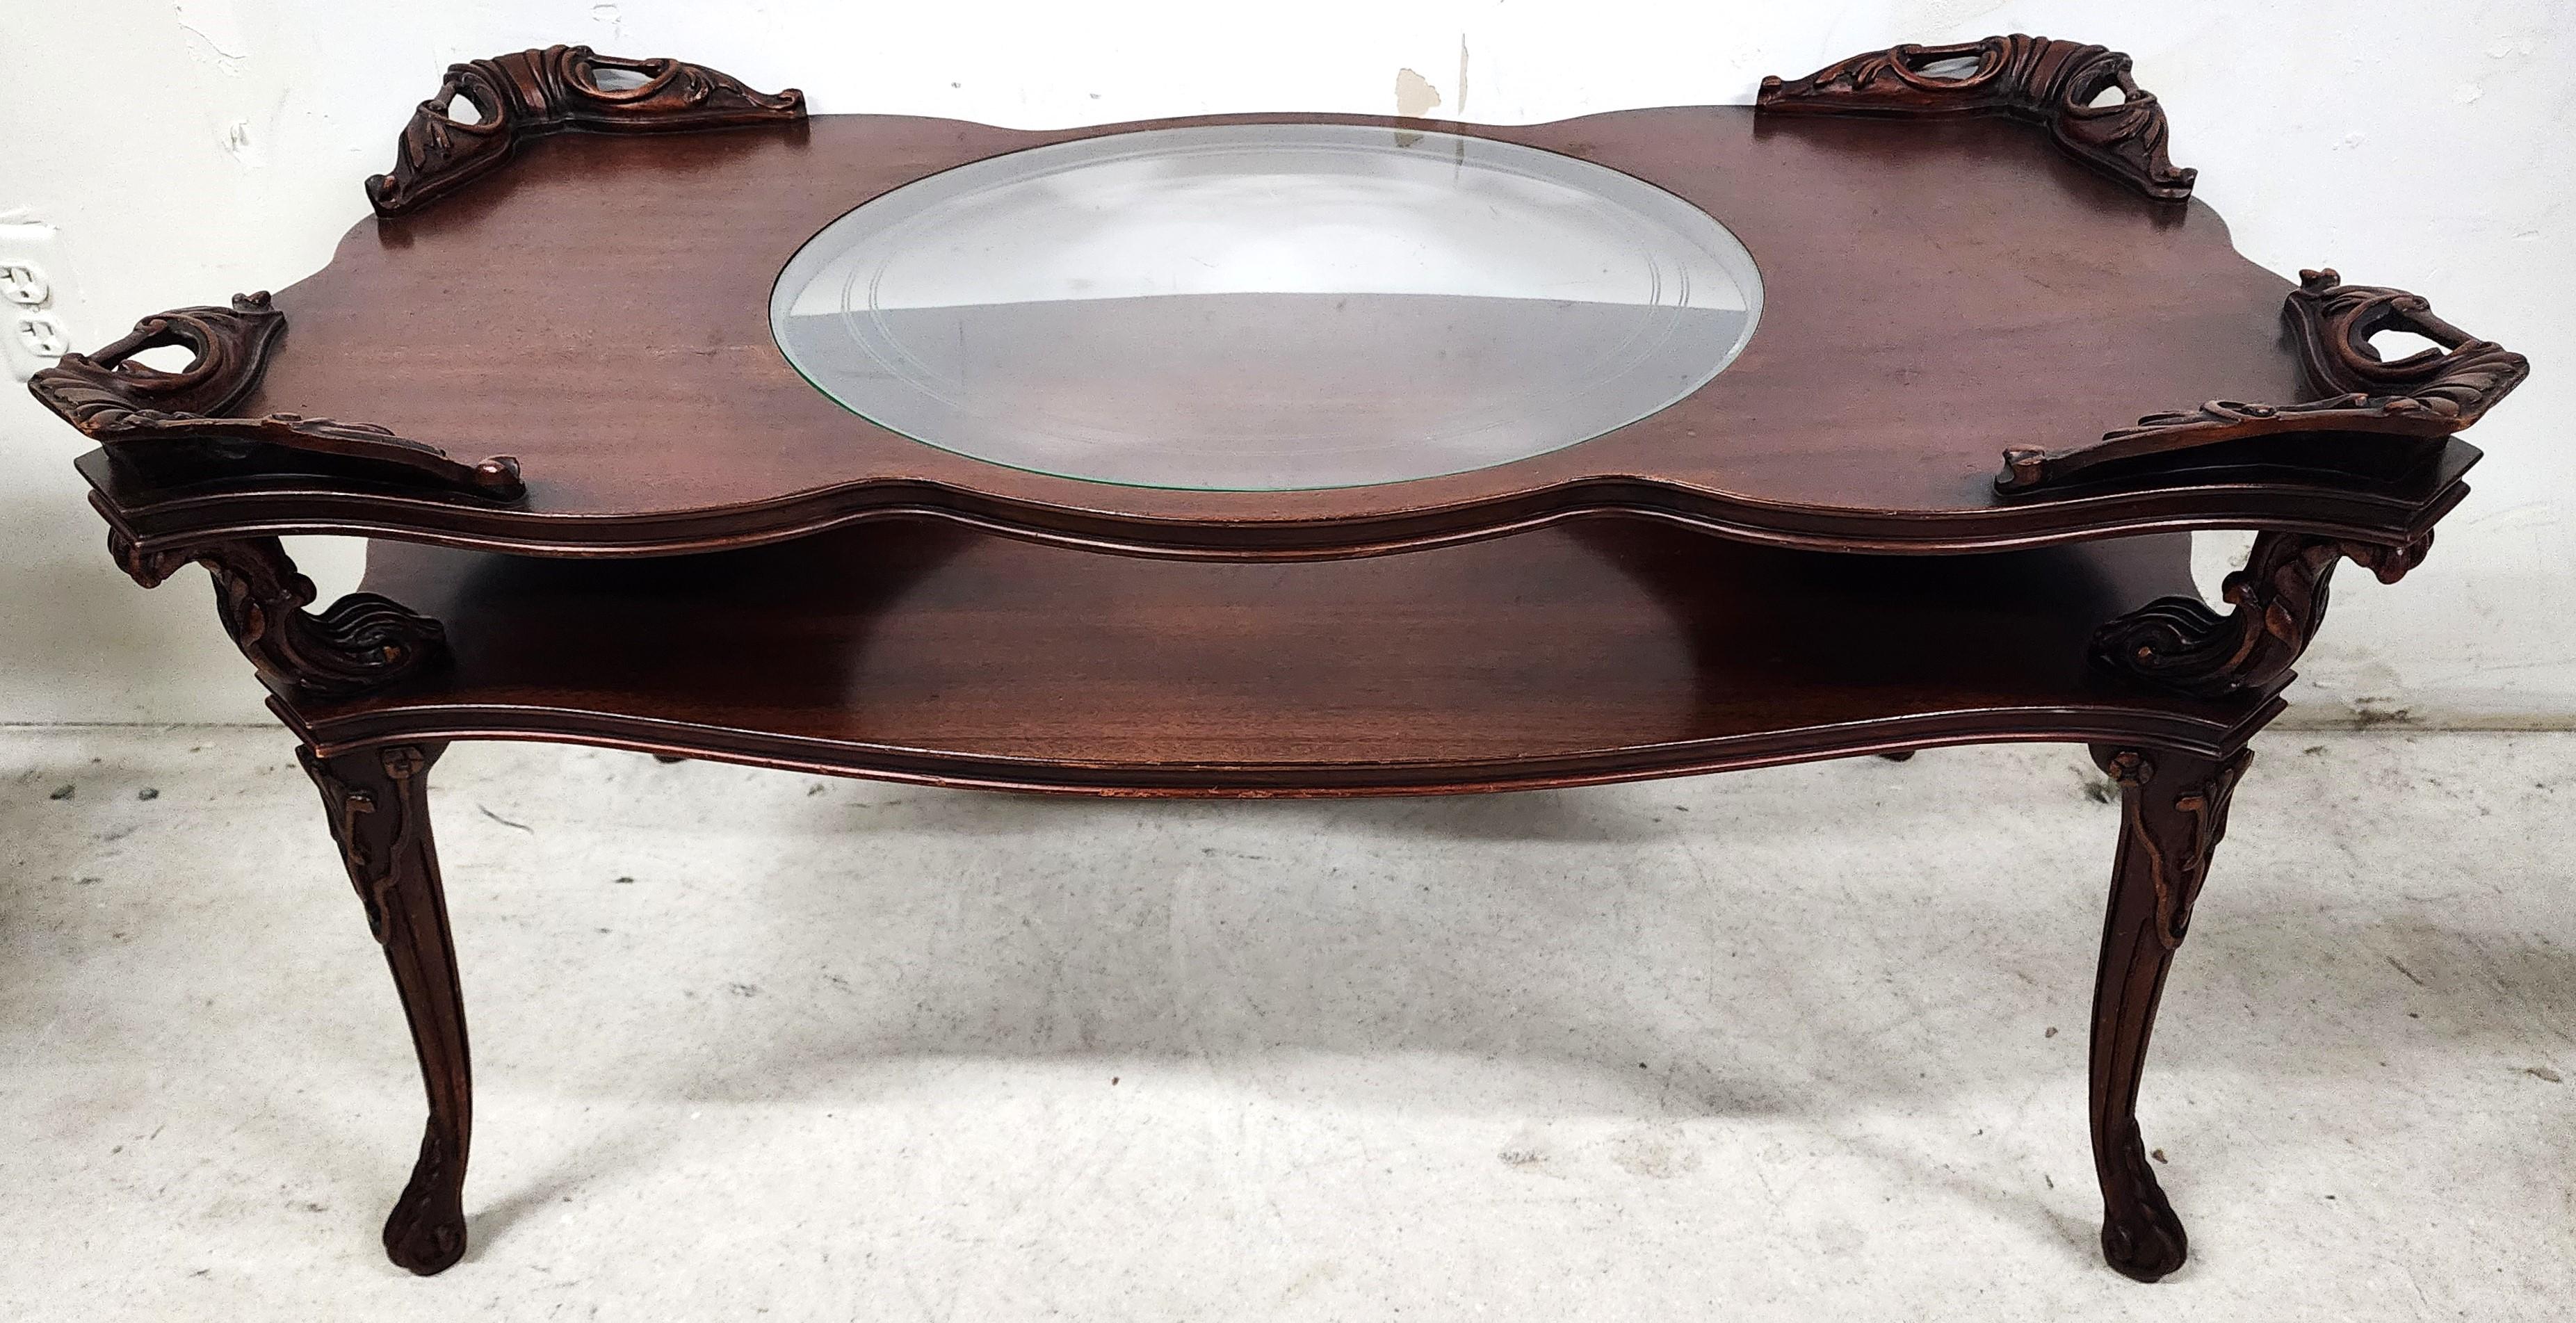 For FULL item description click on CONTINUE READING at the bottom of this page.

Offering One Of Our Recent Palm Beach Estate Fine Furniture Acquisitions Of An
Antique Coffee Table Louis XV by ADAMS ALWAYS

Adams Always Fine Furniture Louis XV